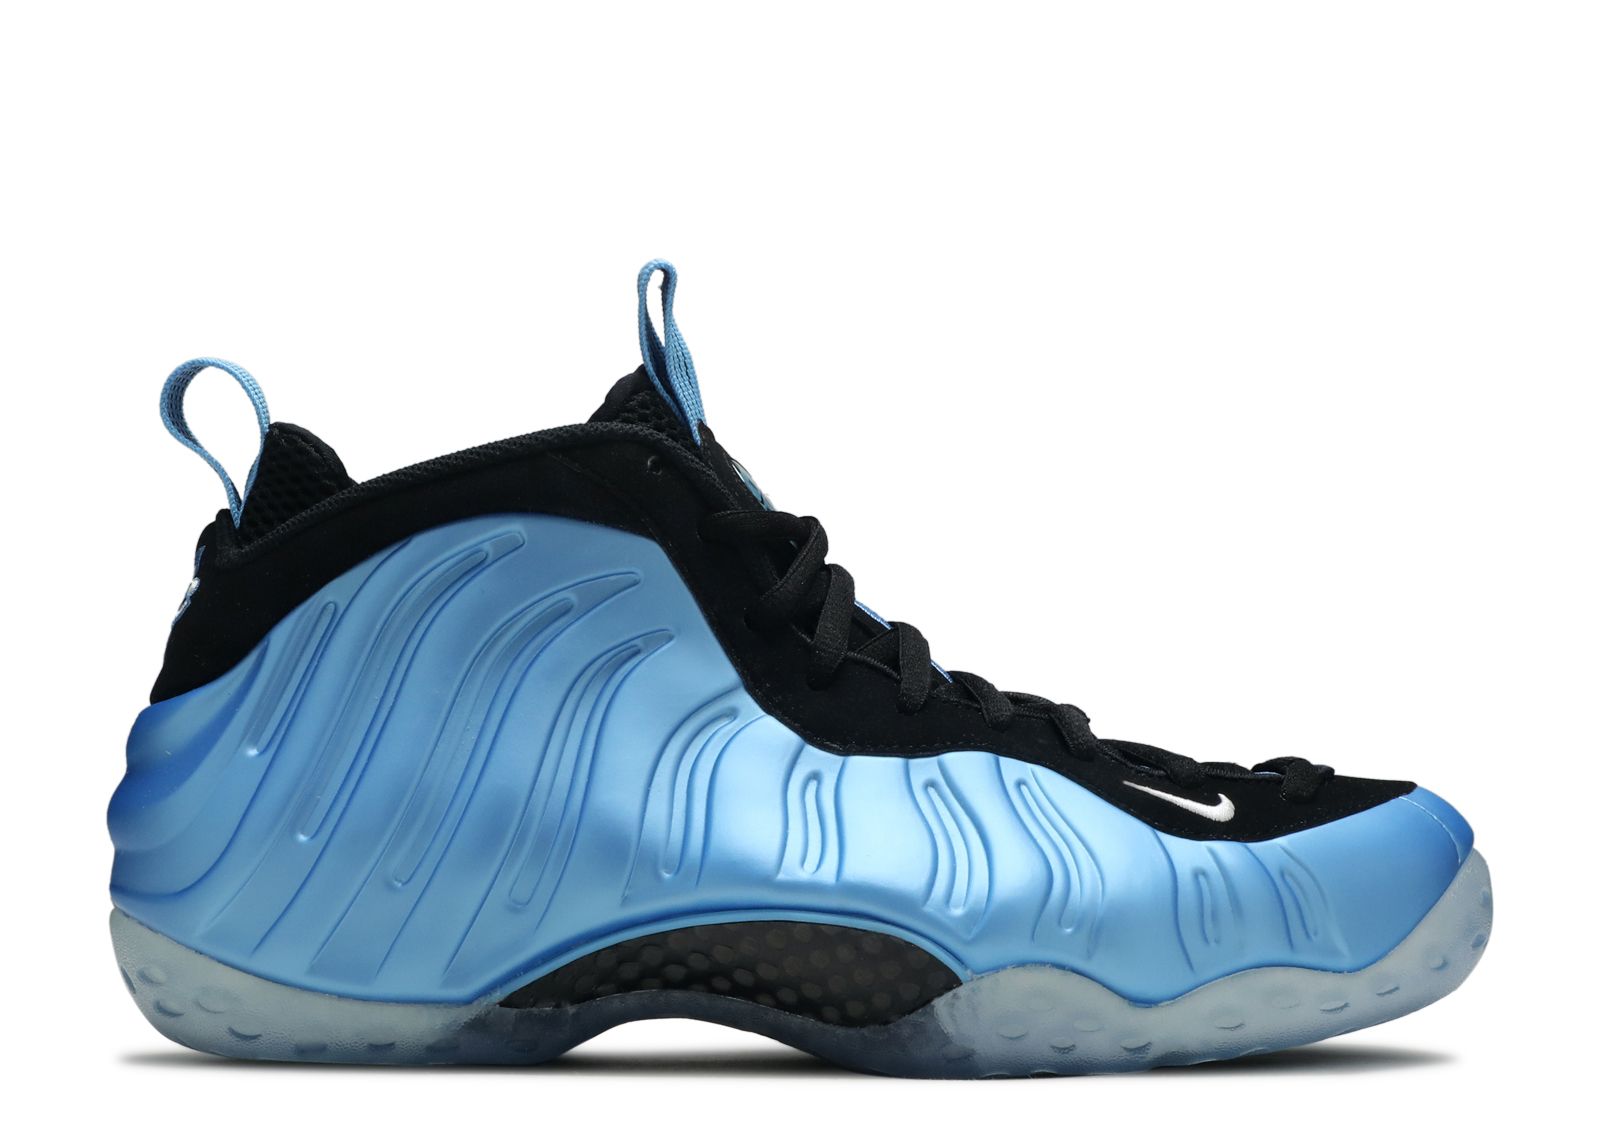 16 Reasons to/NOT to Buy Nike Air Foamposite Pro (Sep